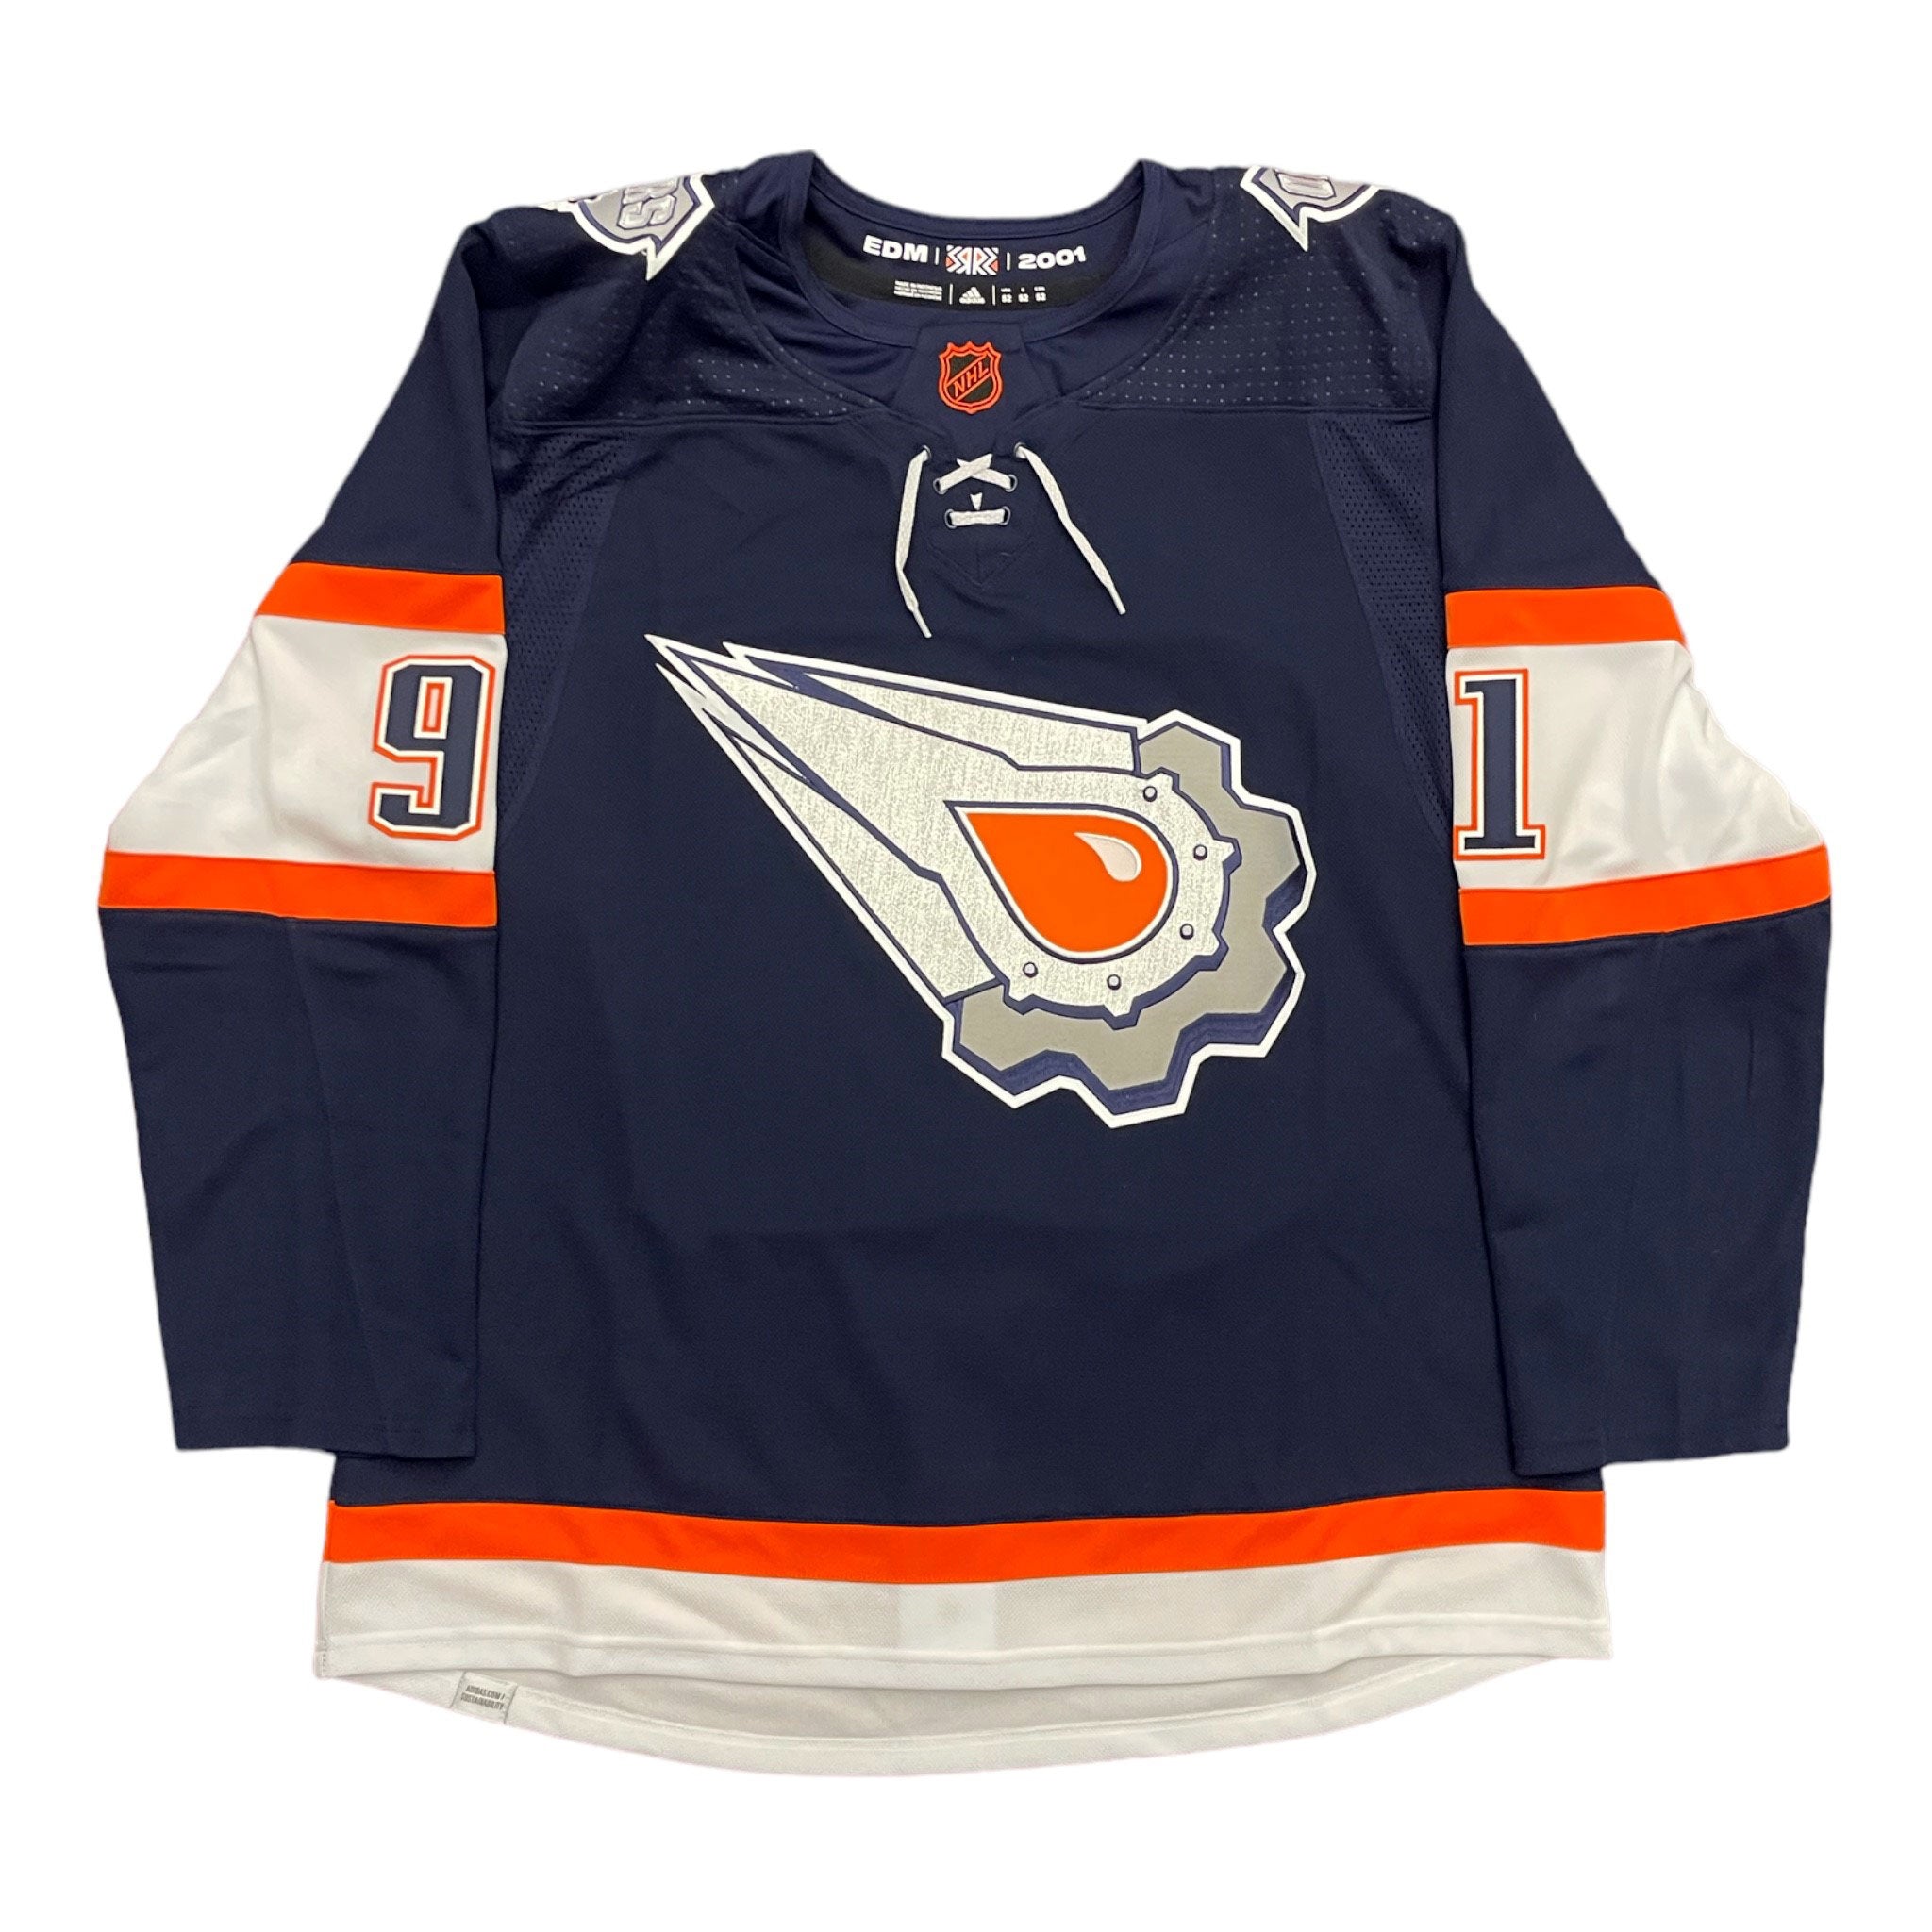 adidas Oilers Third Authentic Pro Jersey - Blue